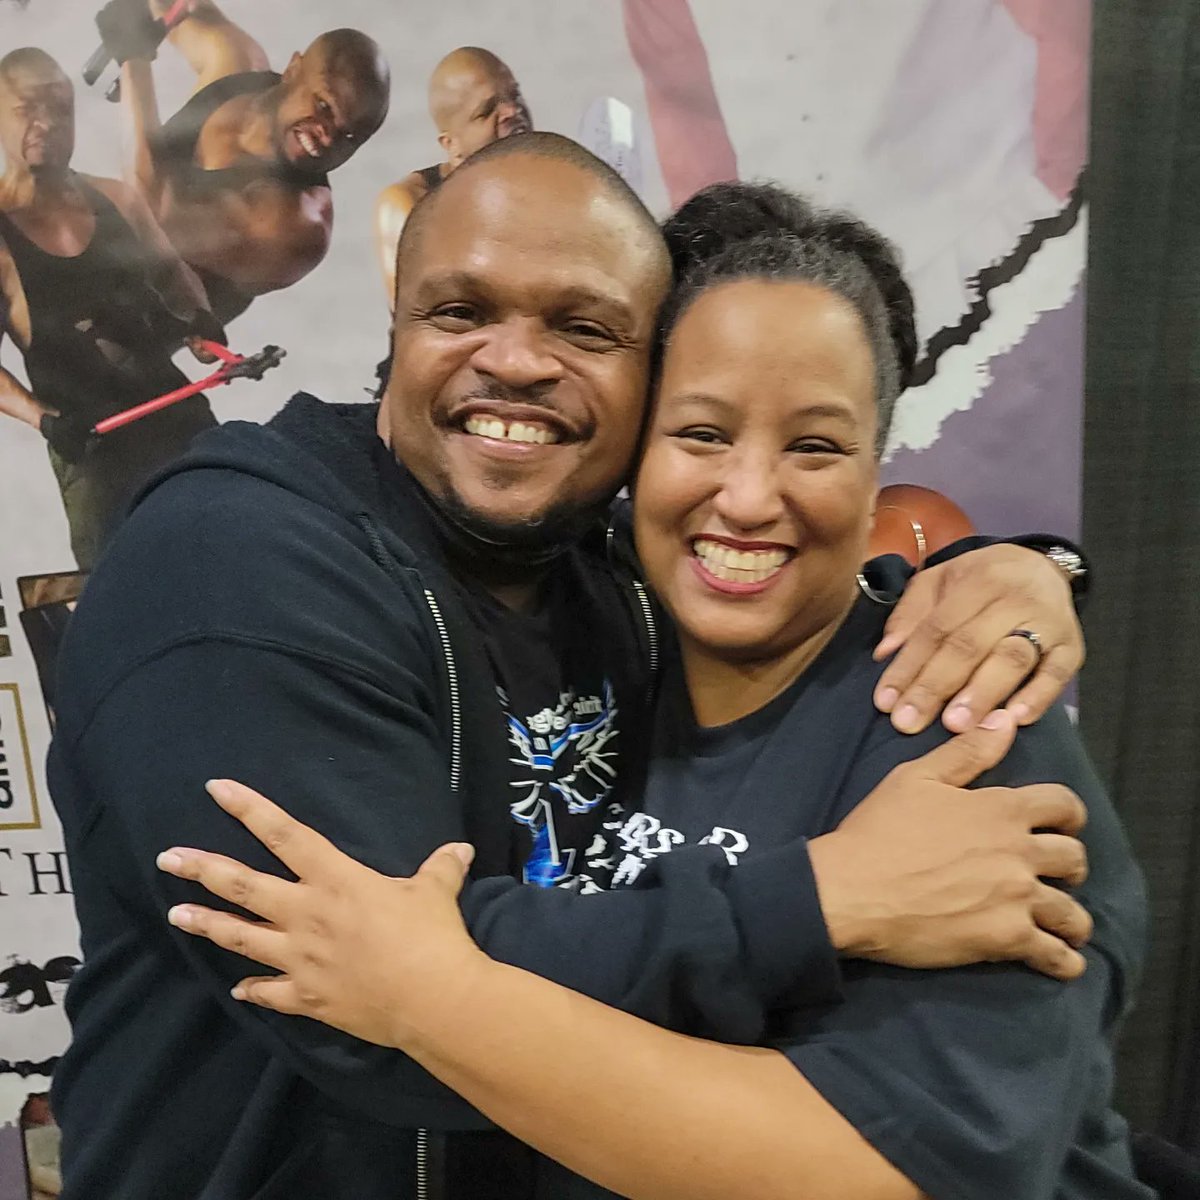 Last day of #atlcomicconvention and I got to meet Matt Lintz and @ironesingleton (a fellow #gradybaby 🙌🏾🙌🏾🙌🏾. Headed now to spend the reat of the day in Senoia with Kacey and Michele. Until the next con... #thewalkingdead #twd #twdfamily